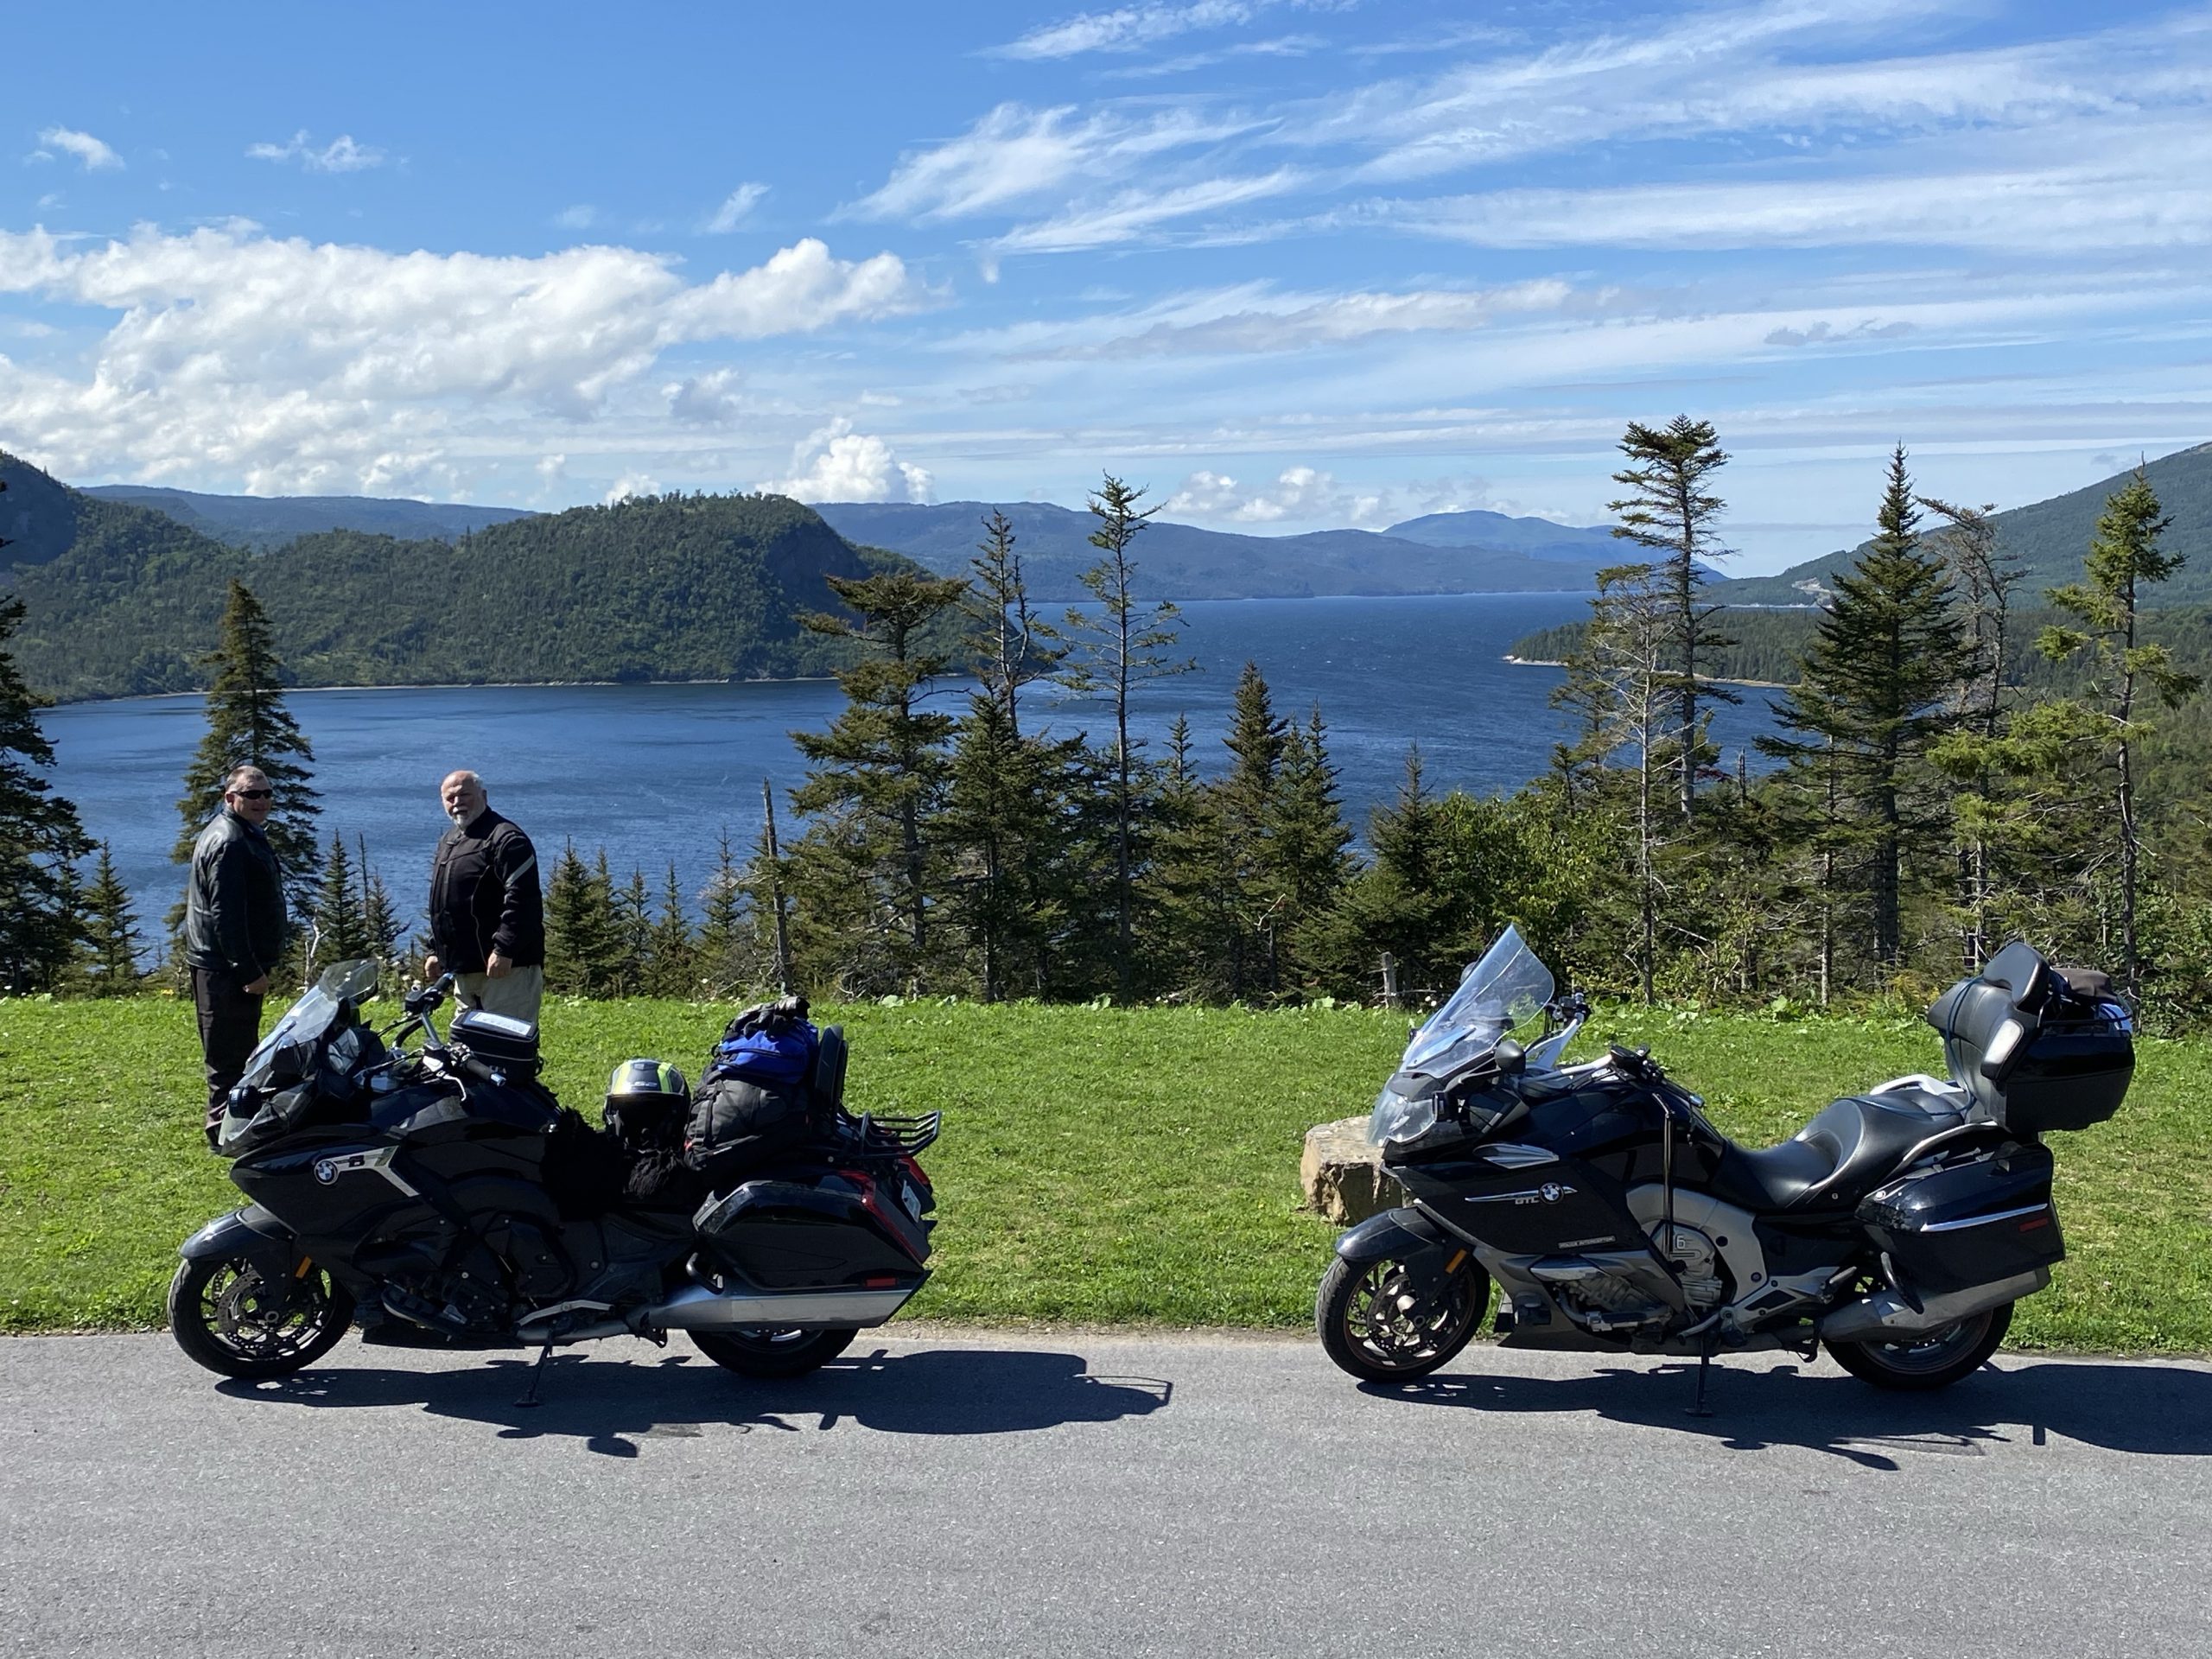 The bikes pose at an overlook of Bonne Bay in Newfoundland.